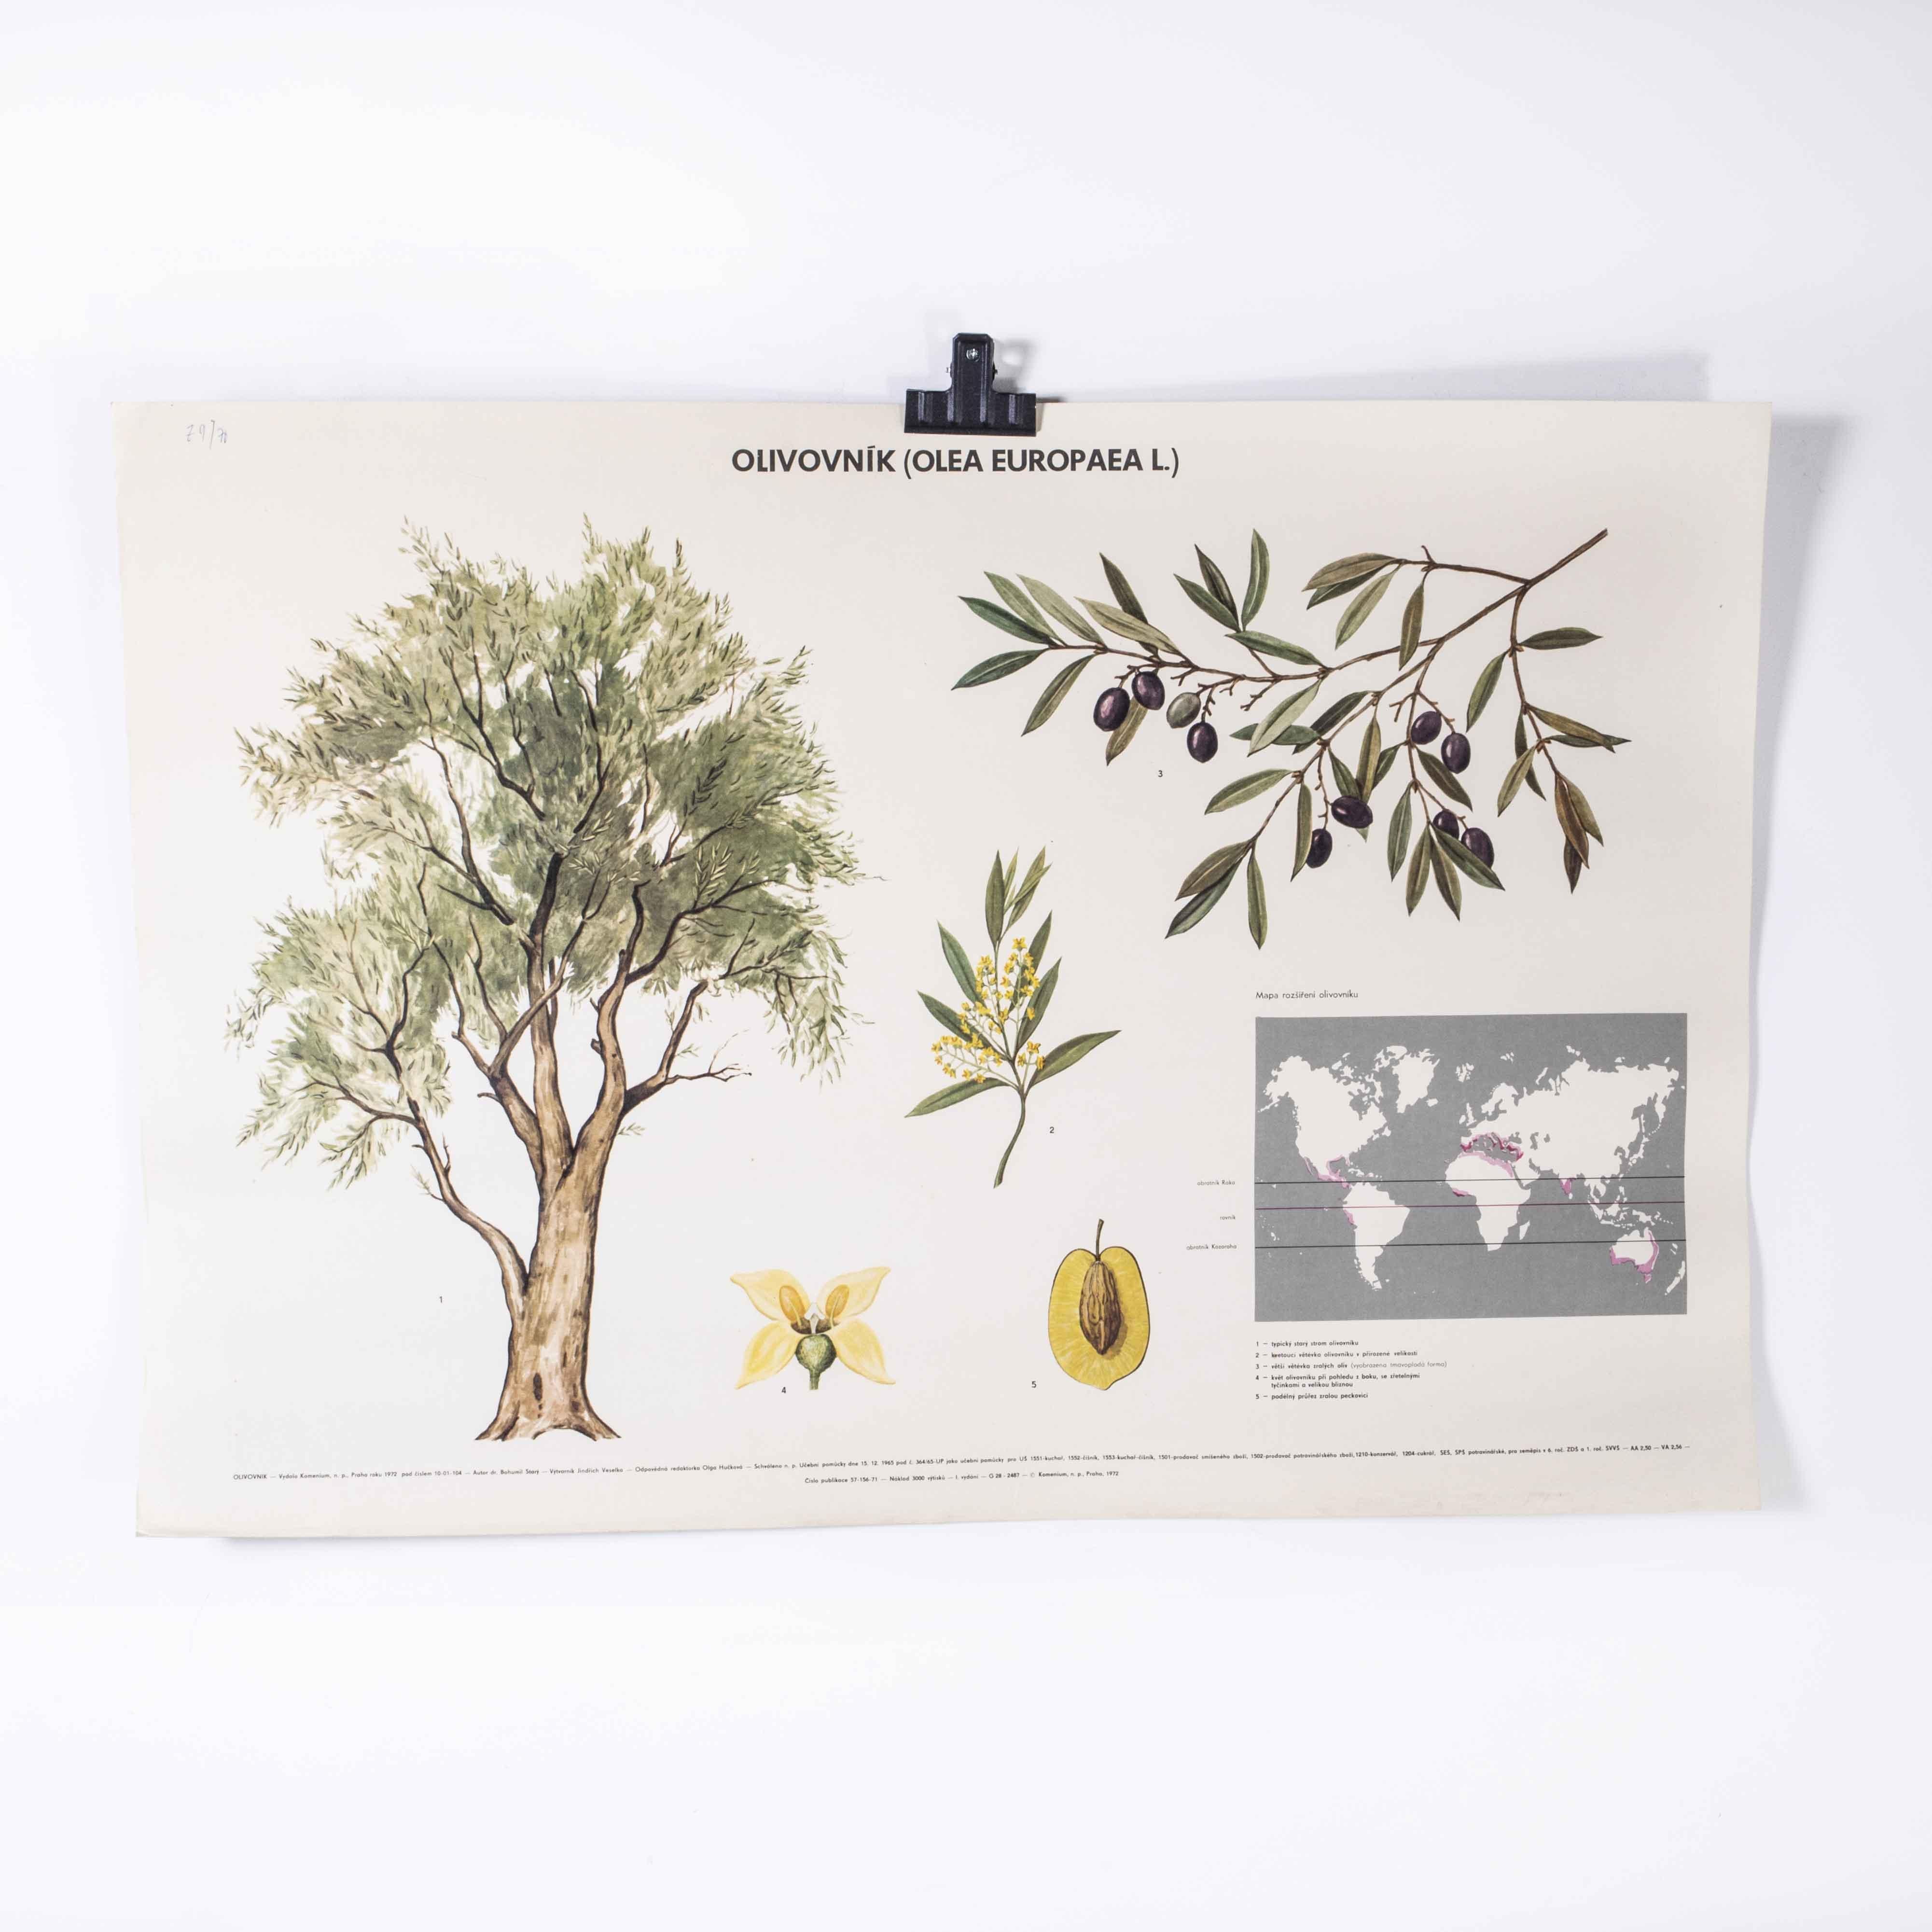 1970’s Olive Tree Educational Poster
1970’s Olive Tree Educational Poster. 20th century Czechoslovakian educational chart. A rare and vintage wall chart from the Czech Republic illustrating the internal structure of an olive and its tree. This